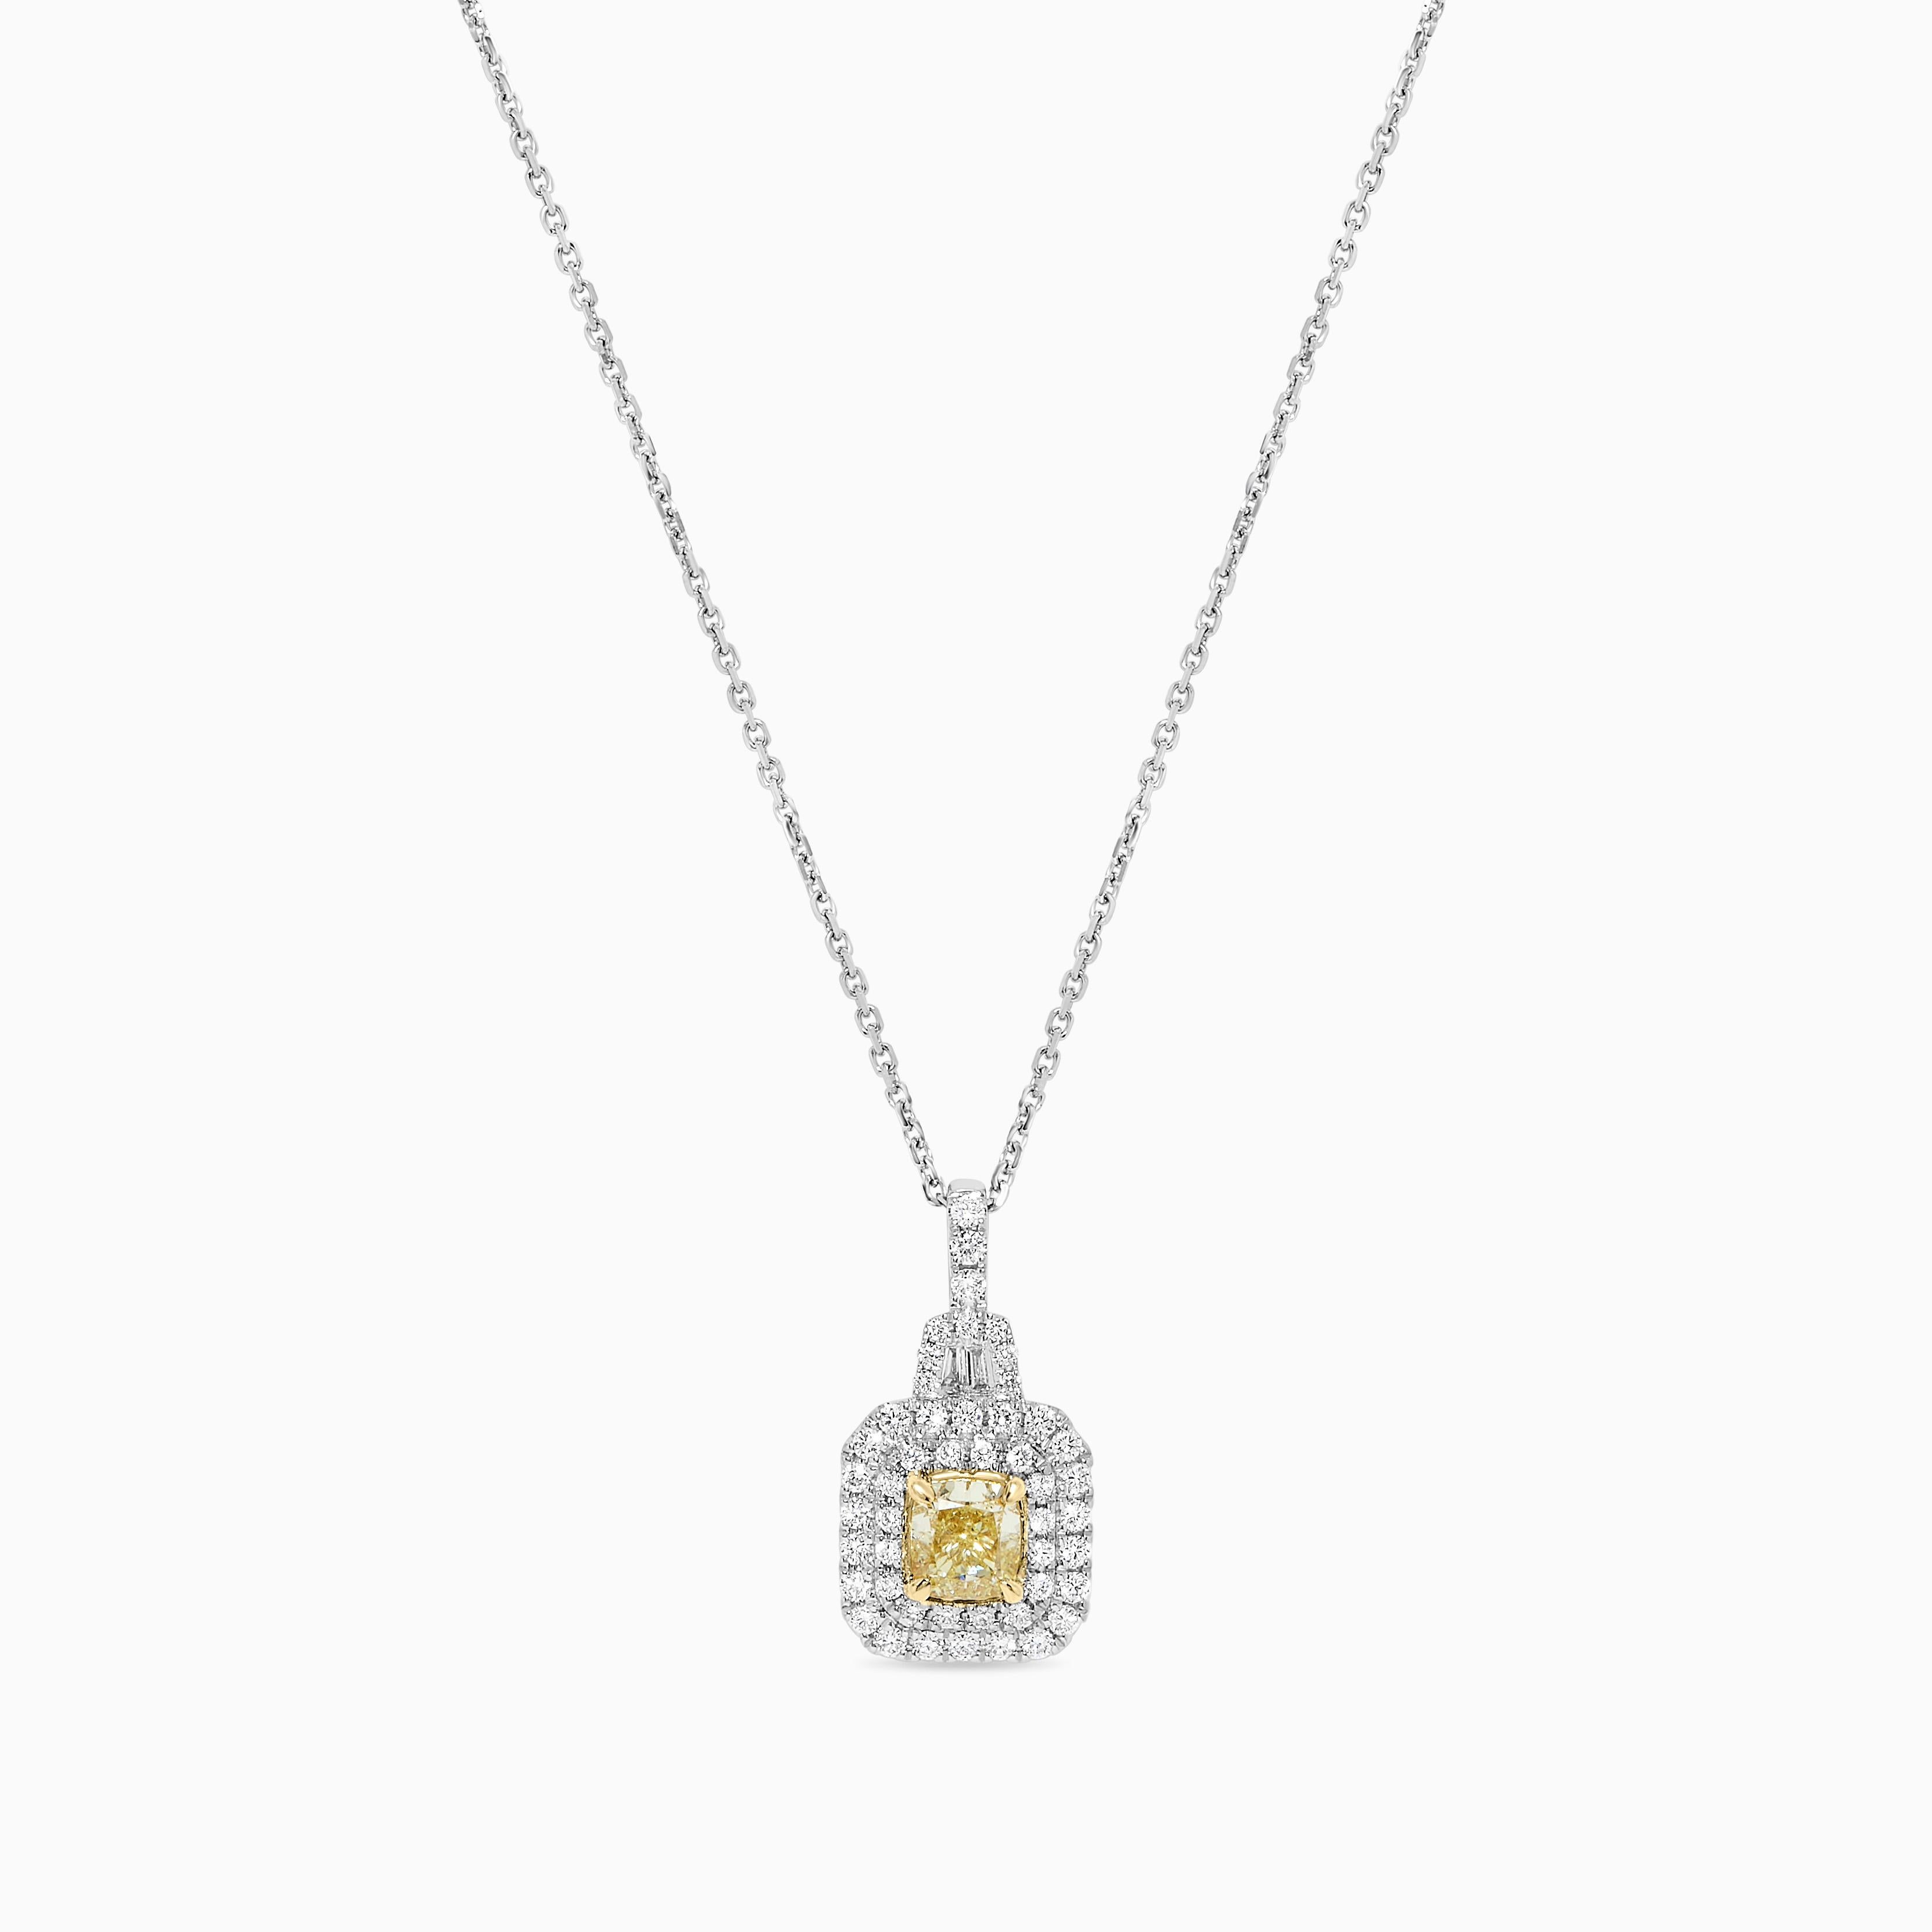 RareGemWorld's intriguing GIA certified diamond pendant. Mounted in a beautiful 18K Yellow and White Gold setting with a natural cushion cut yellow diamond. The yellow diamond is surrounded by natural baguette cut white diamonds and round natural